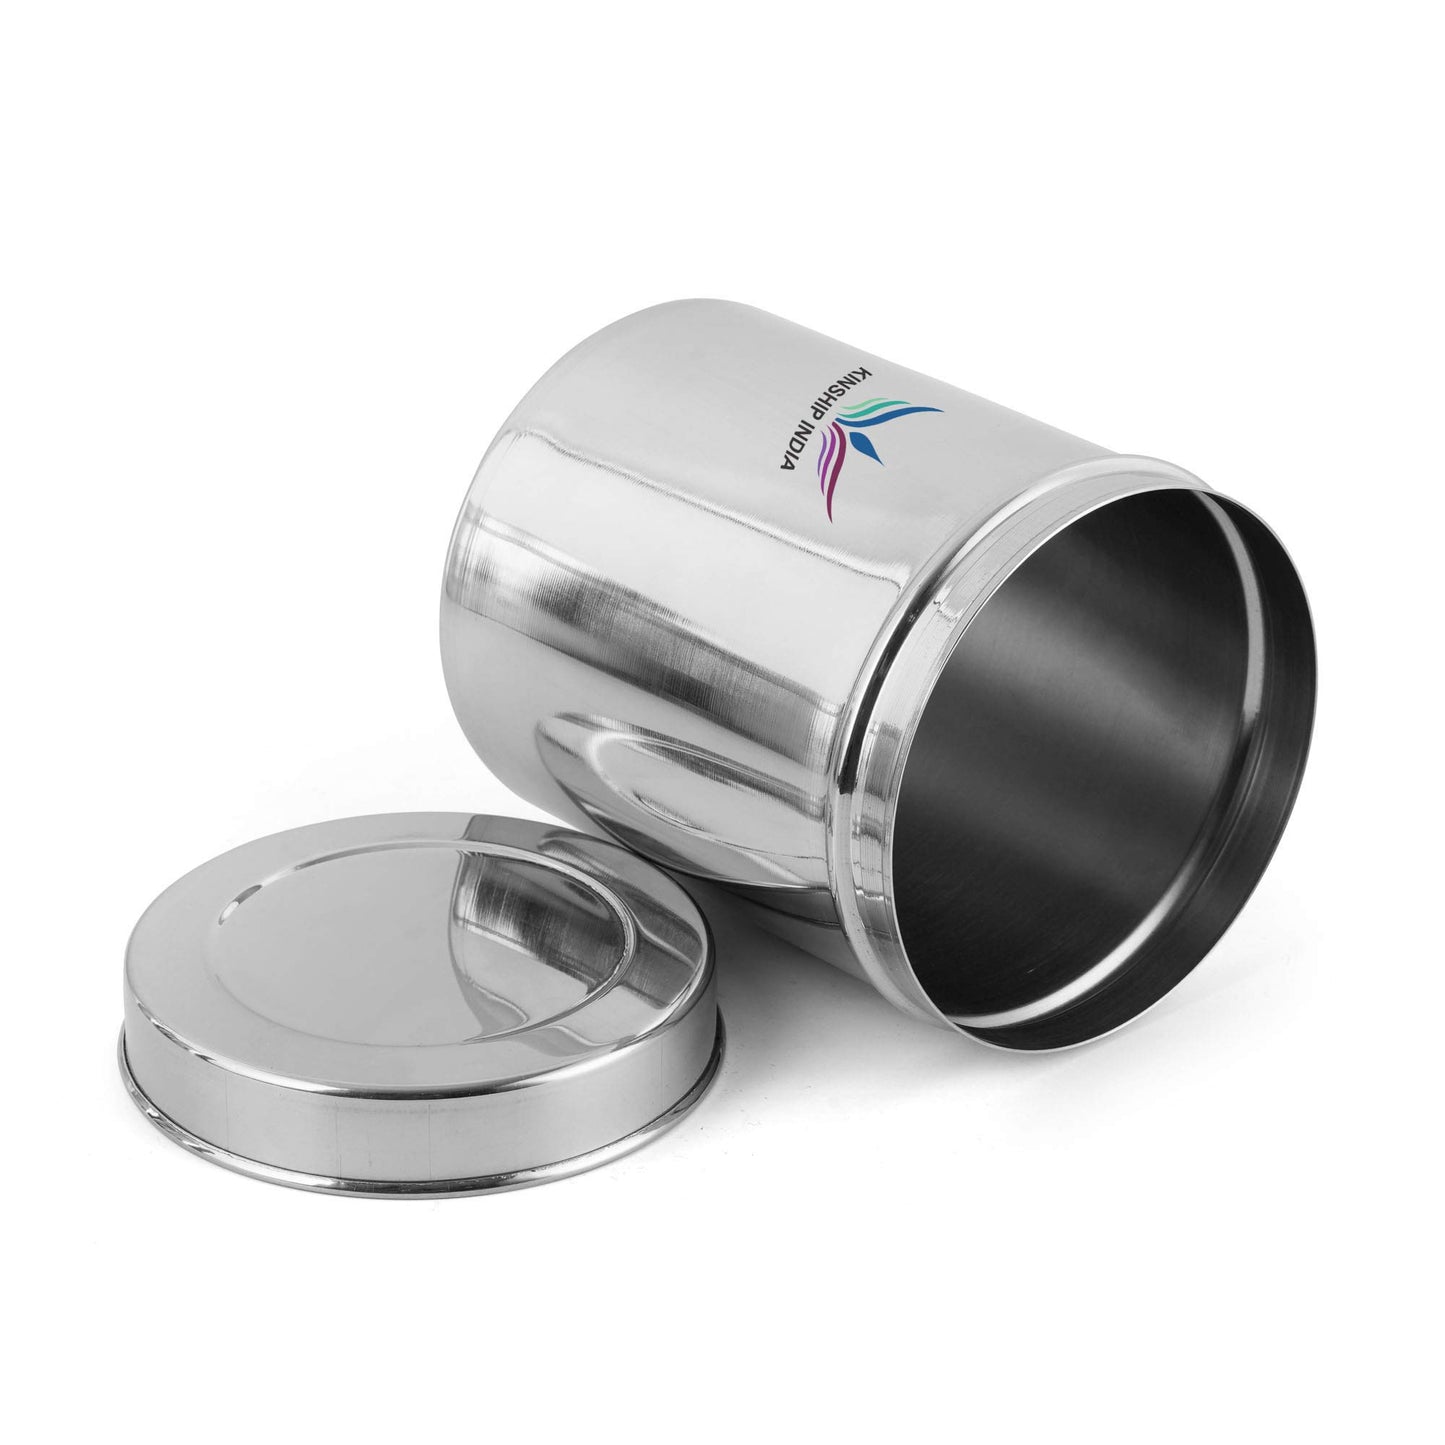 Stainless Steel Canister/Dabba - 3300 ml, 3 Pieces,